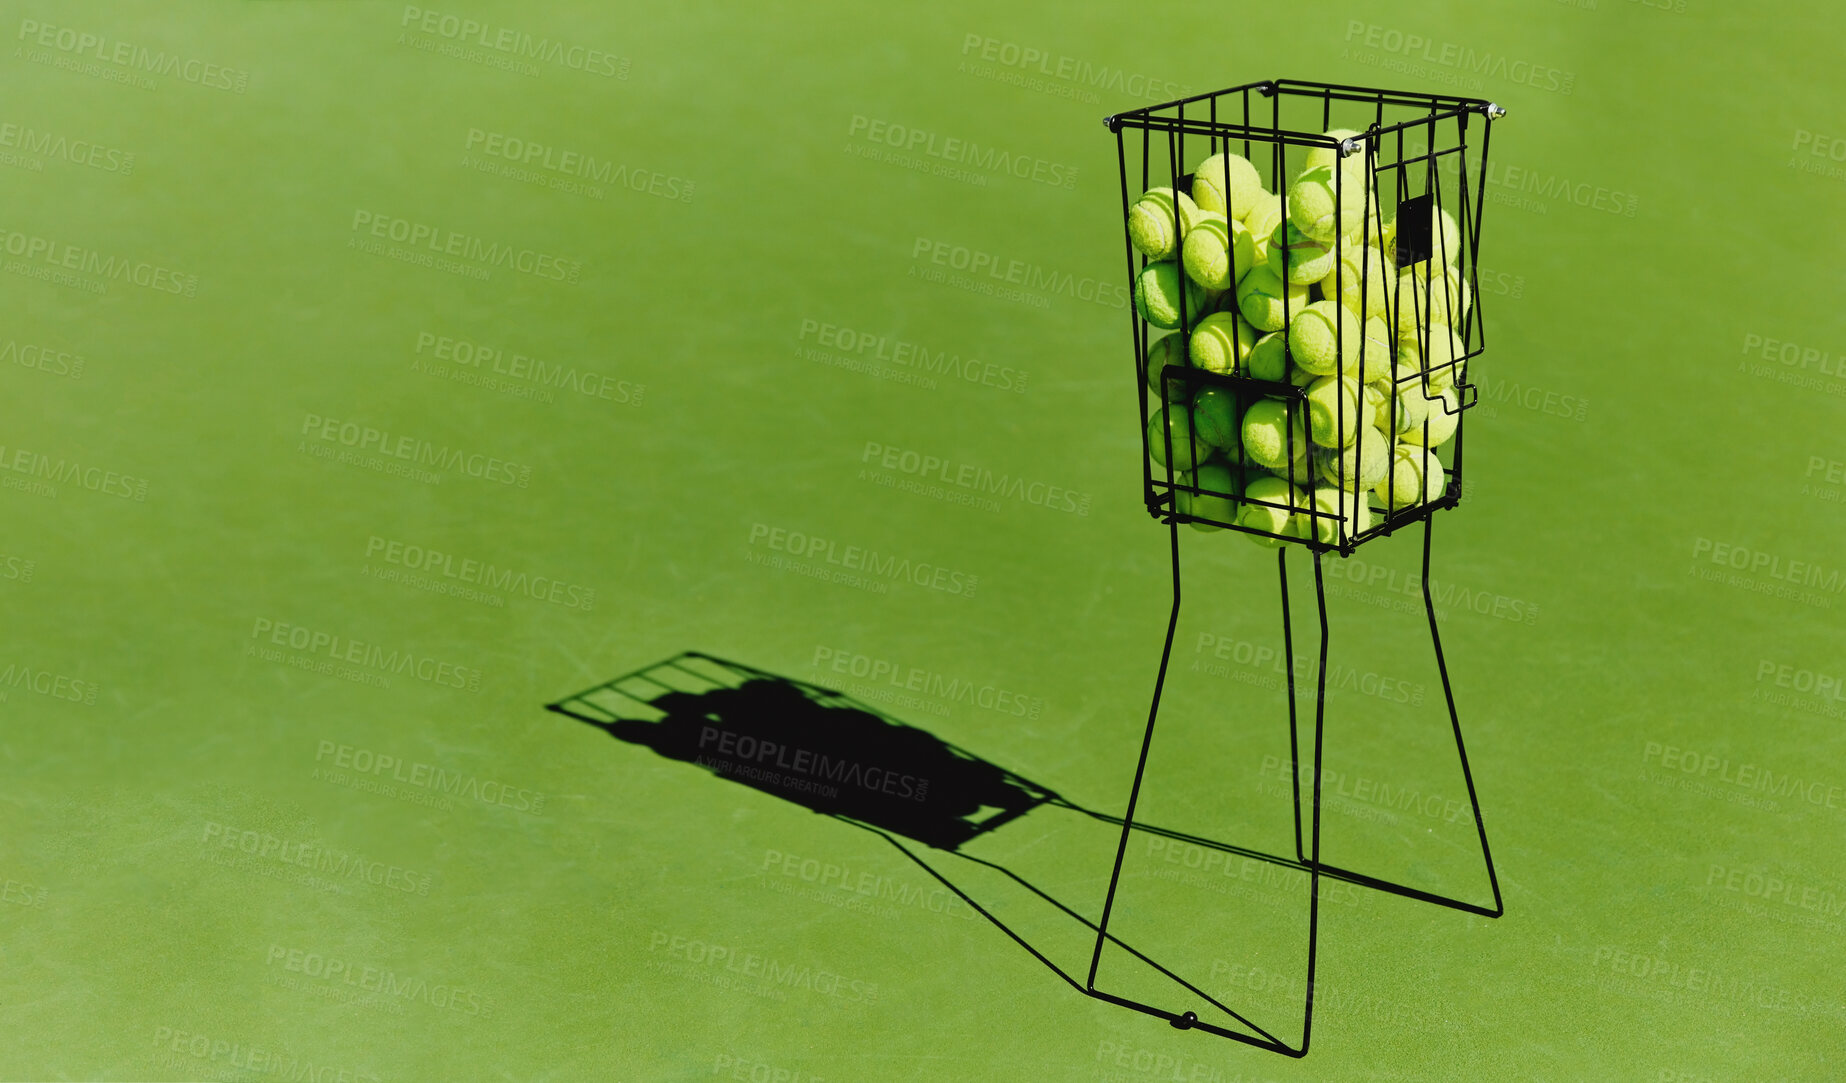 Buy stock photo Tennis, sport ball basket of sports field on a green training court outdoor with no people. Exercise, fitness and workout equipment shadow for match of game competition on turf ground with mockup